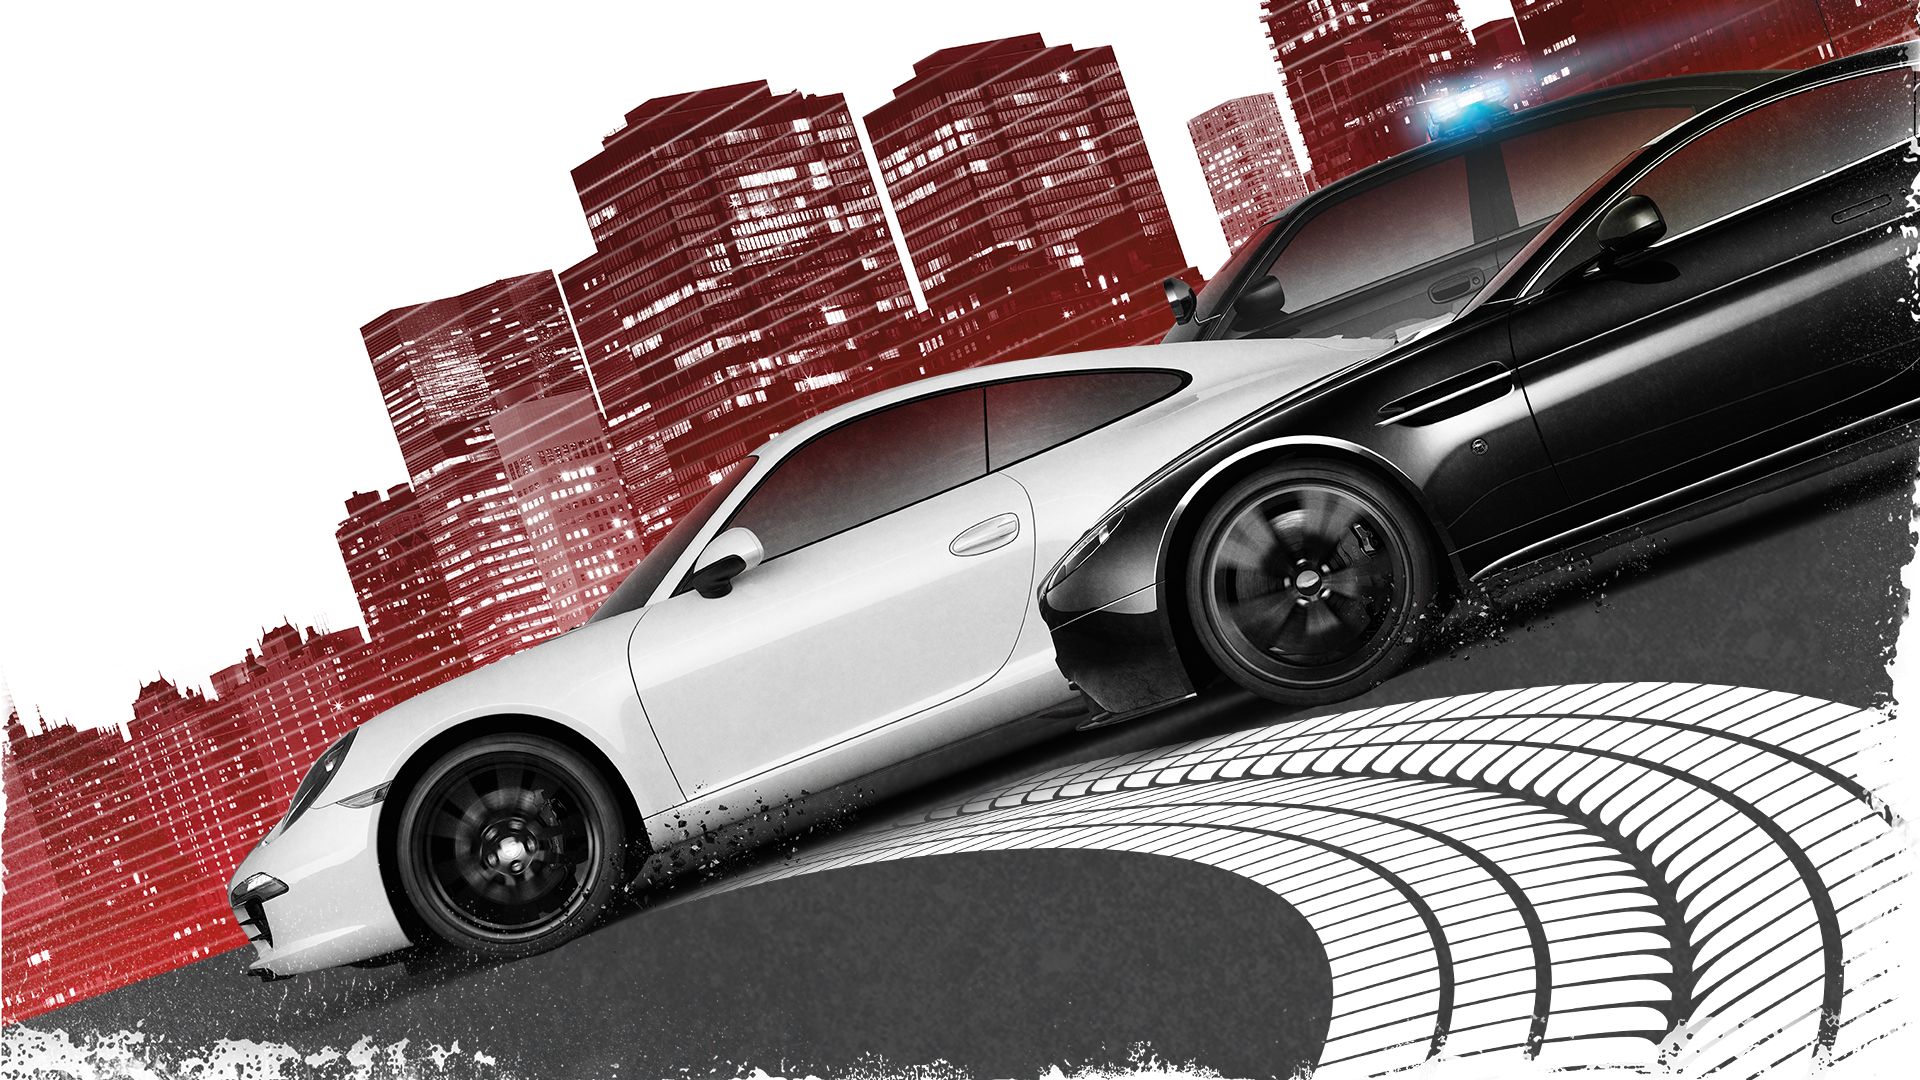 Need For Speed: Most Wanted HD wallpapers, Desktop wallpaper - most viewed